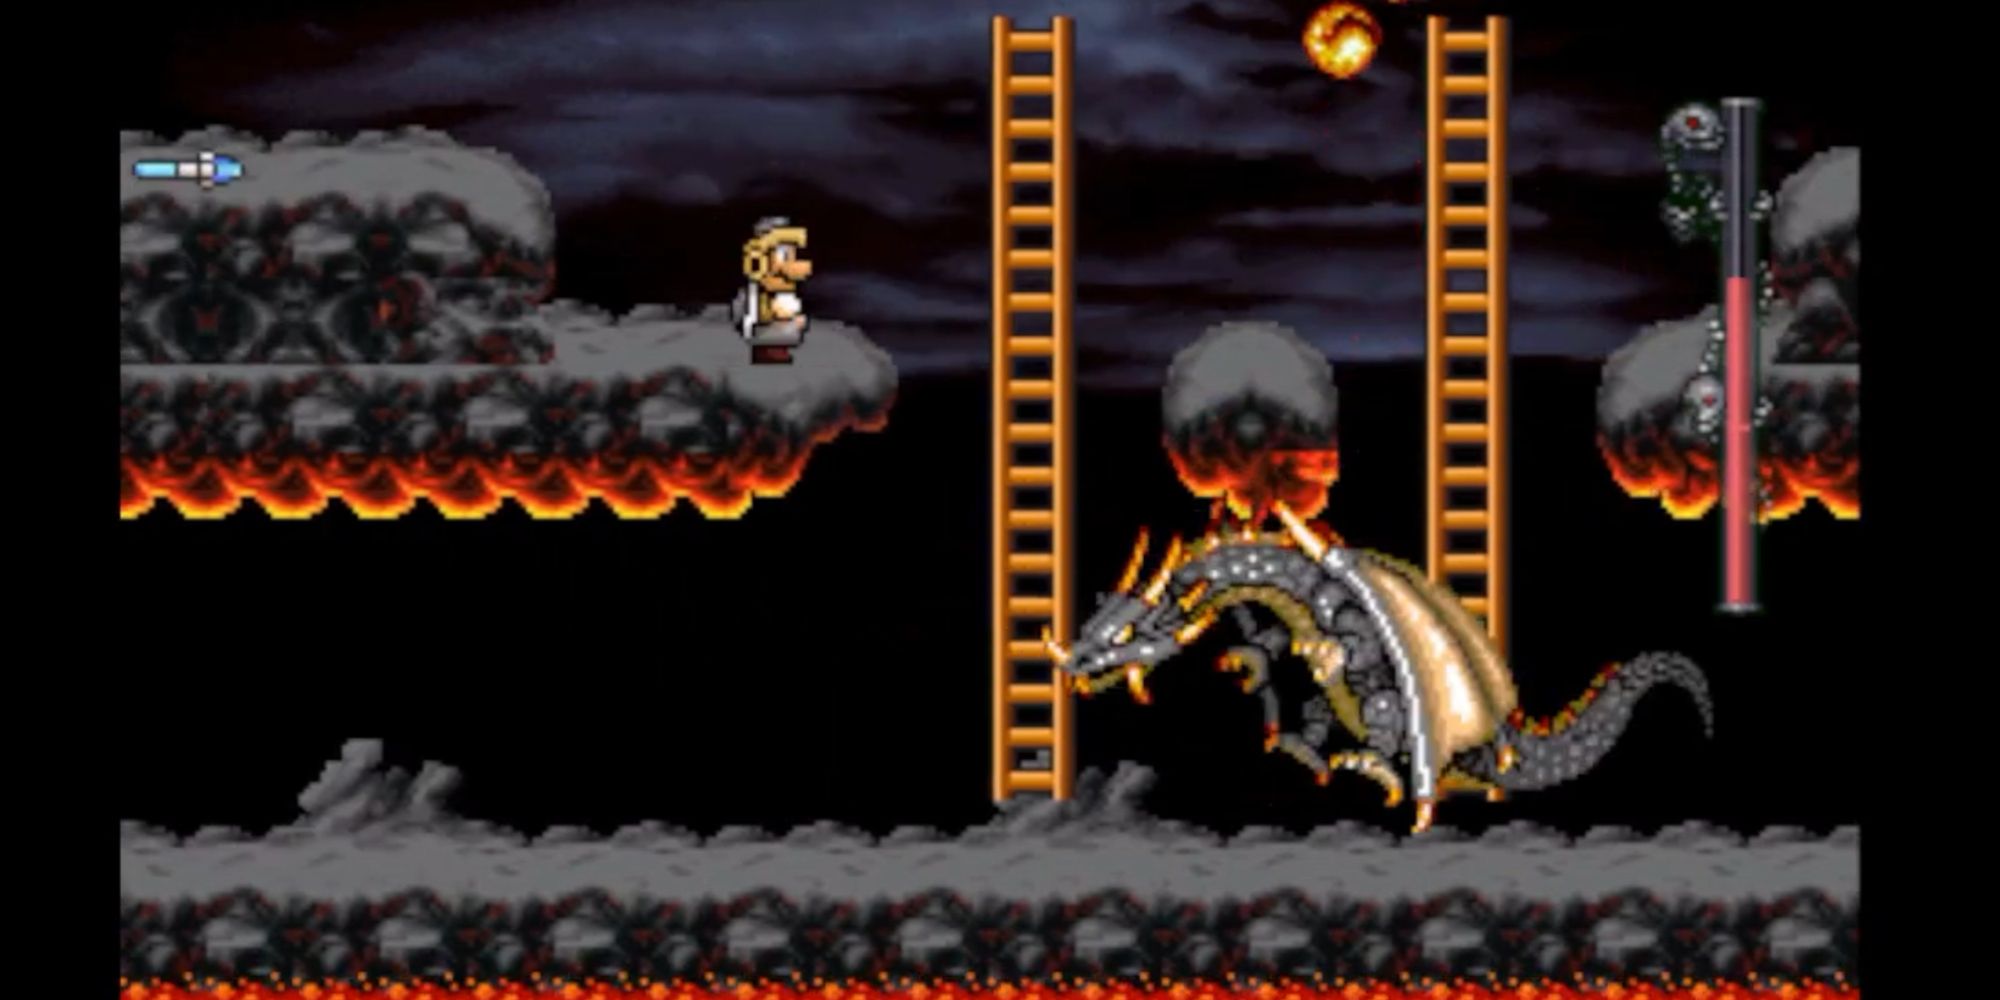 Mario in armor in a ghastly gameplay section facing off with a giant black and gold dragon.